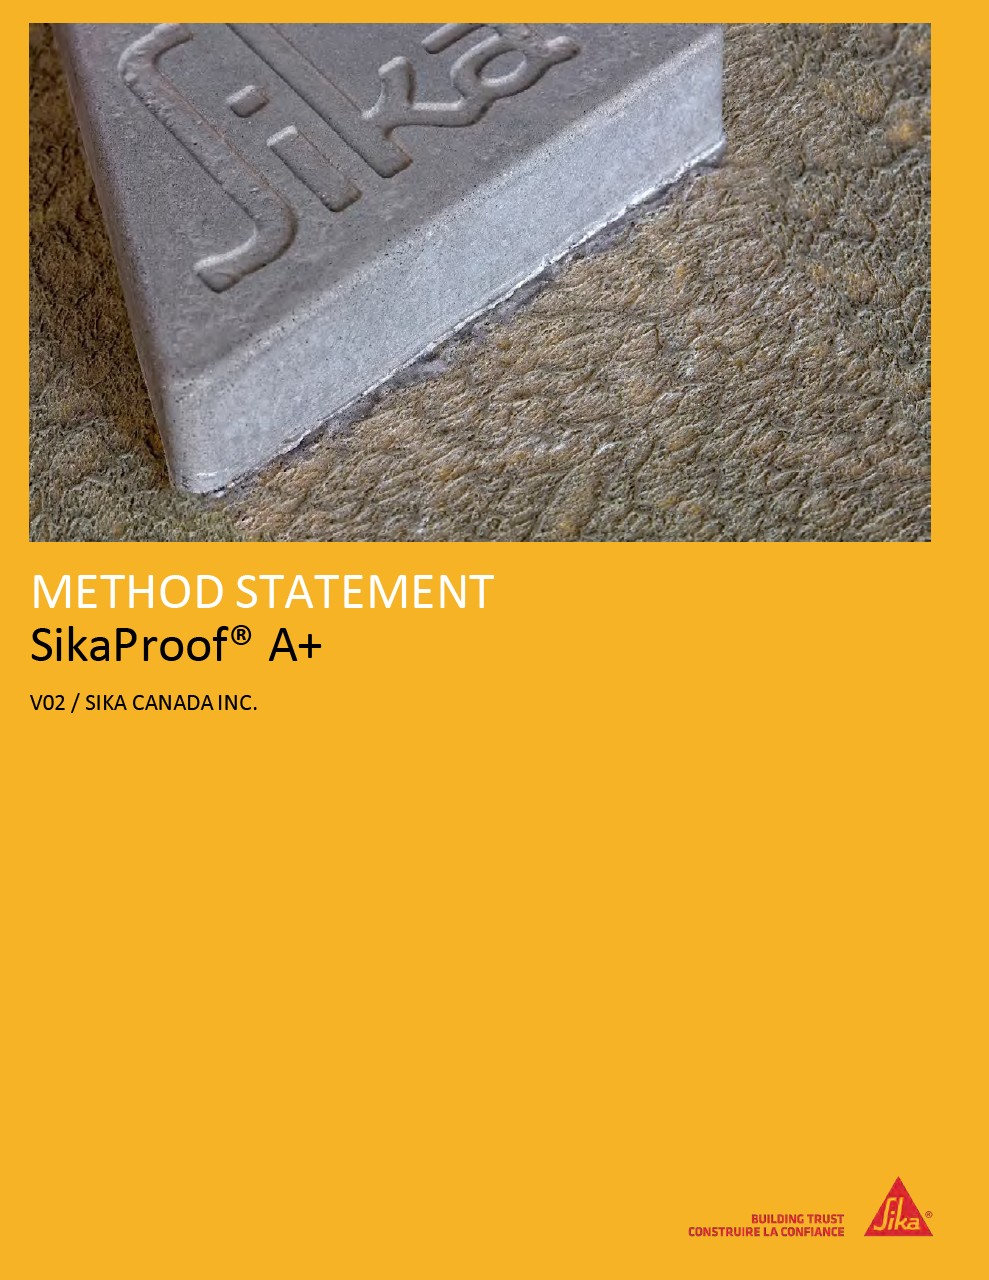 Sikaproof ® A+ - Method Statement